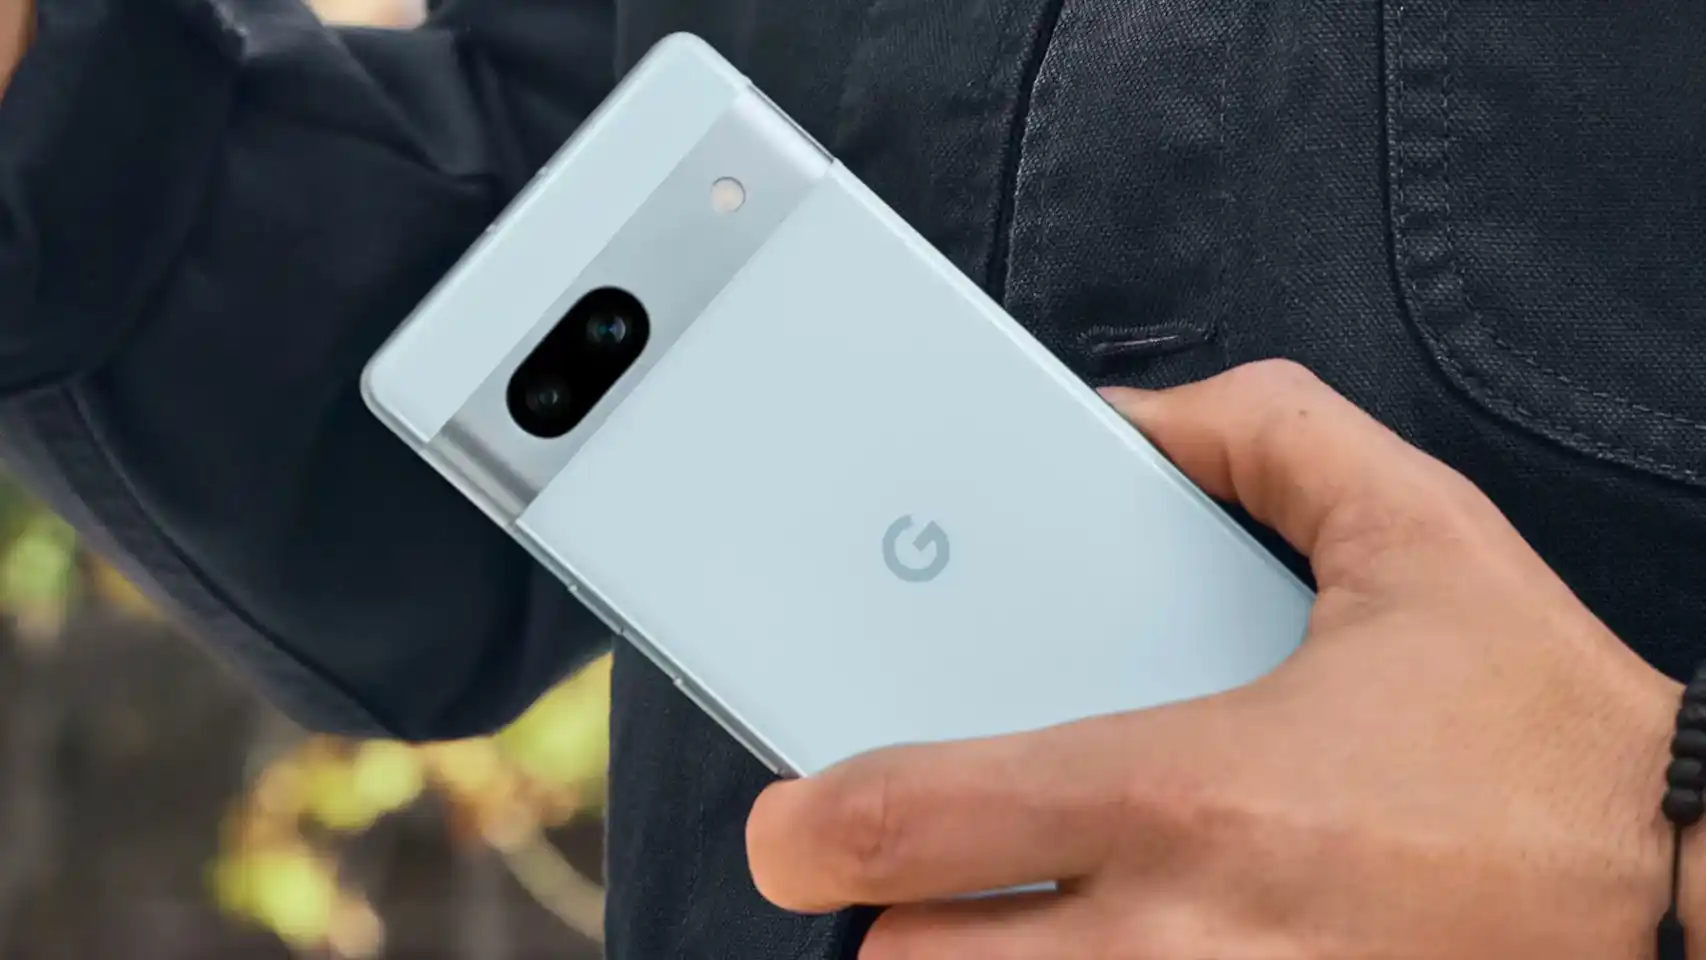 Release date for Pixel 7a, which could be Google's latest cheap phone